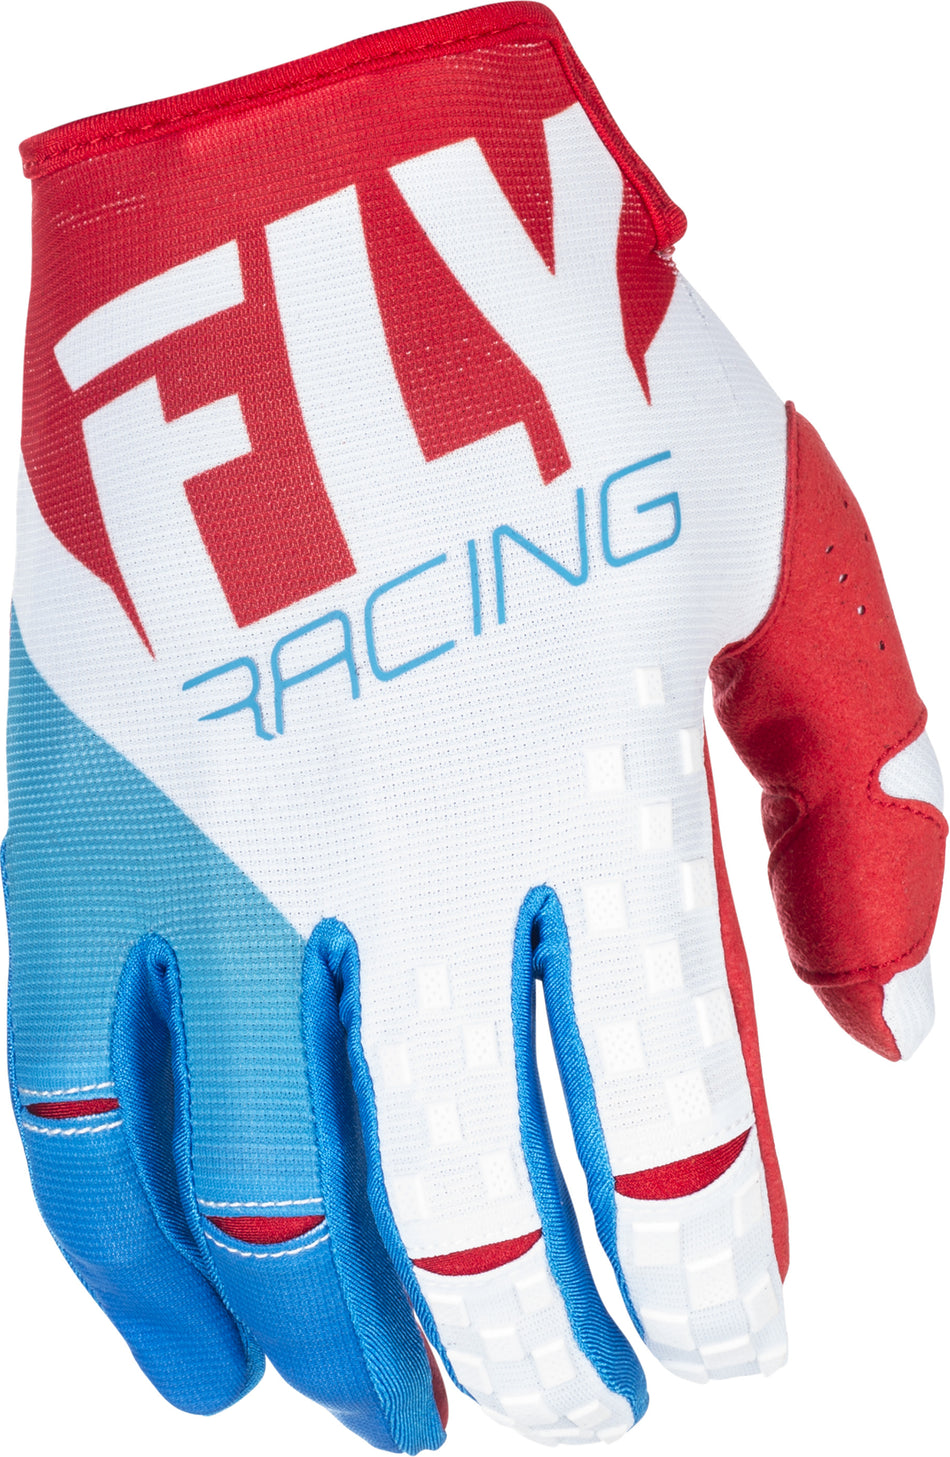 FLY RACING Kinetic Gloves Red/White/Blue Sz 10 371-41310